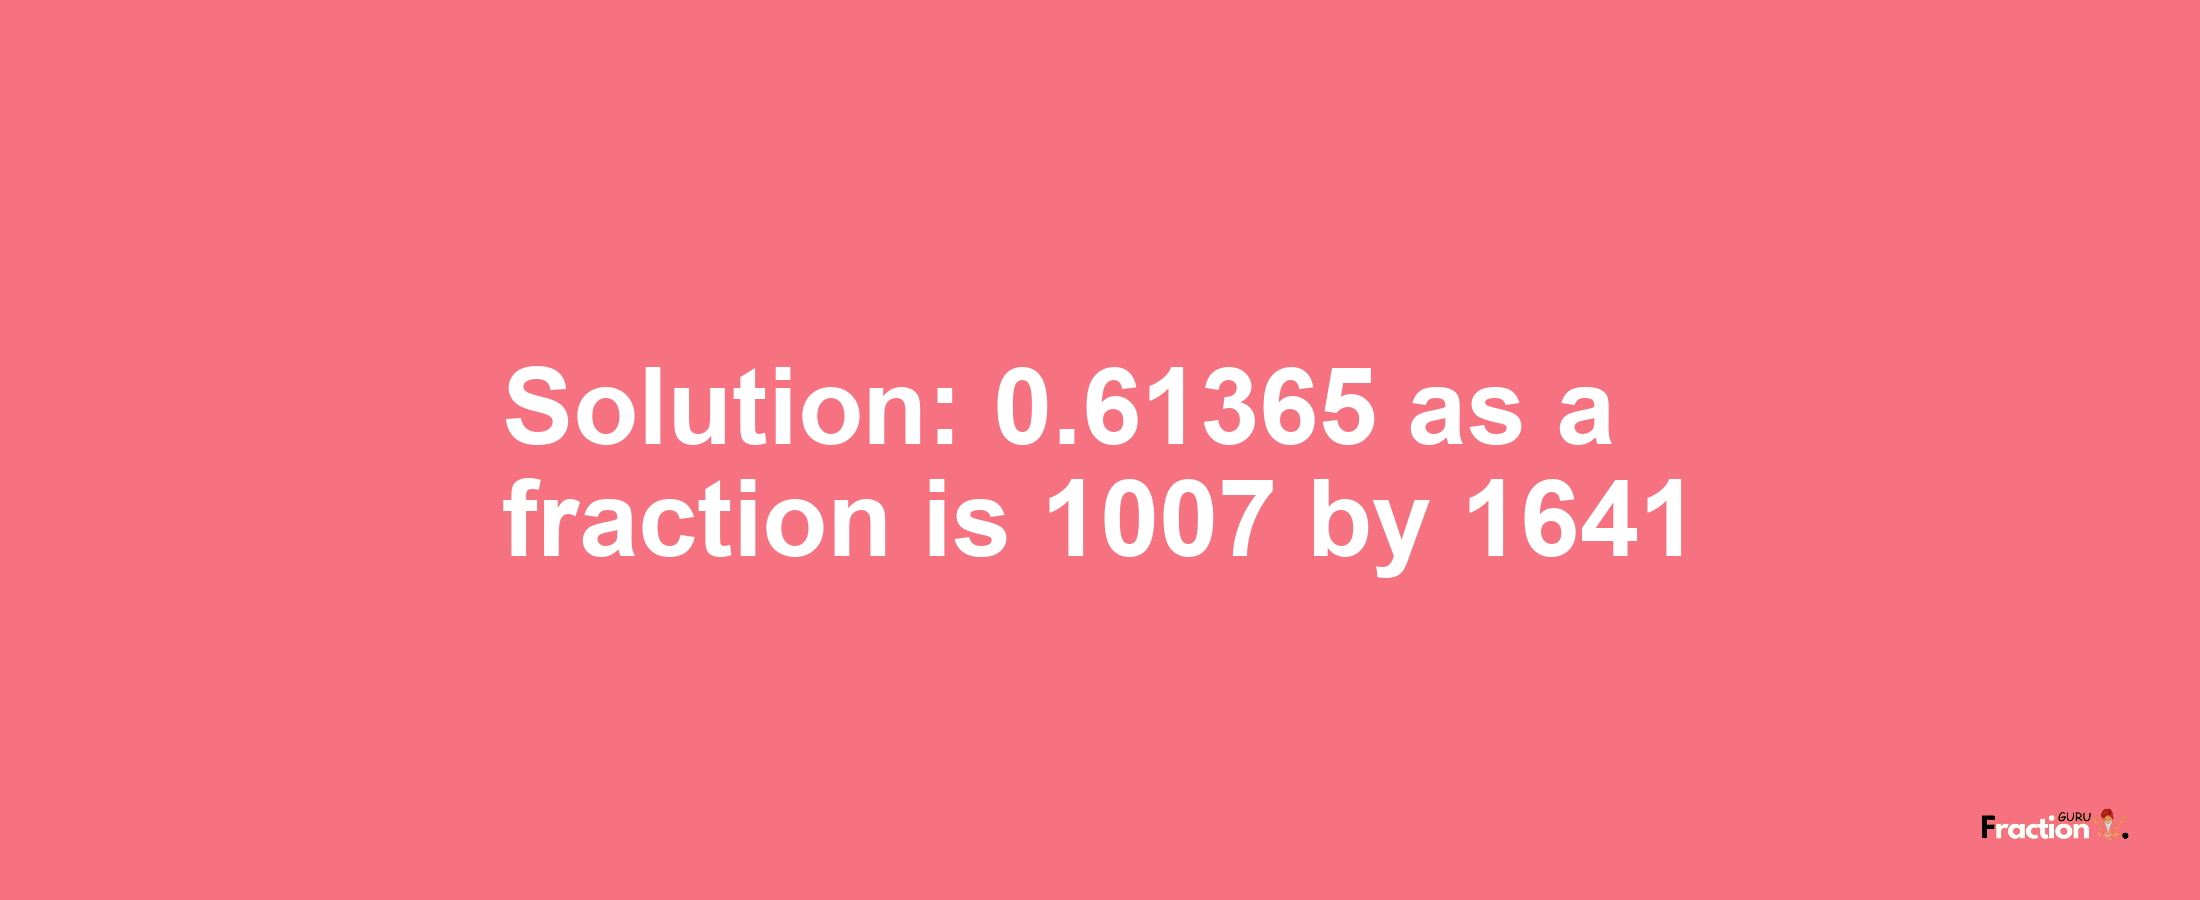 Solution:0.61365 as a fraction is 1007/1641